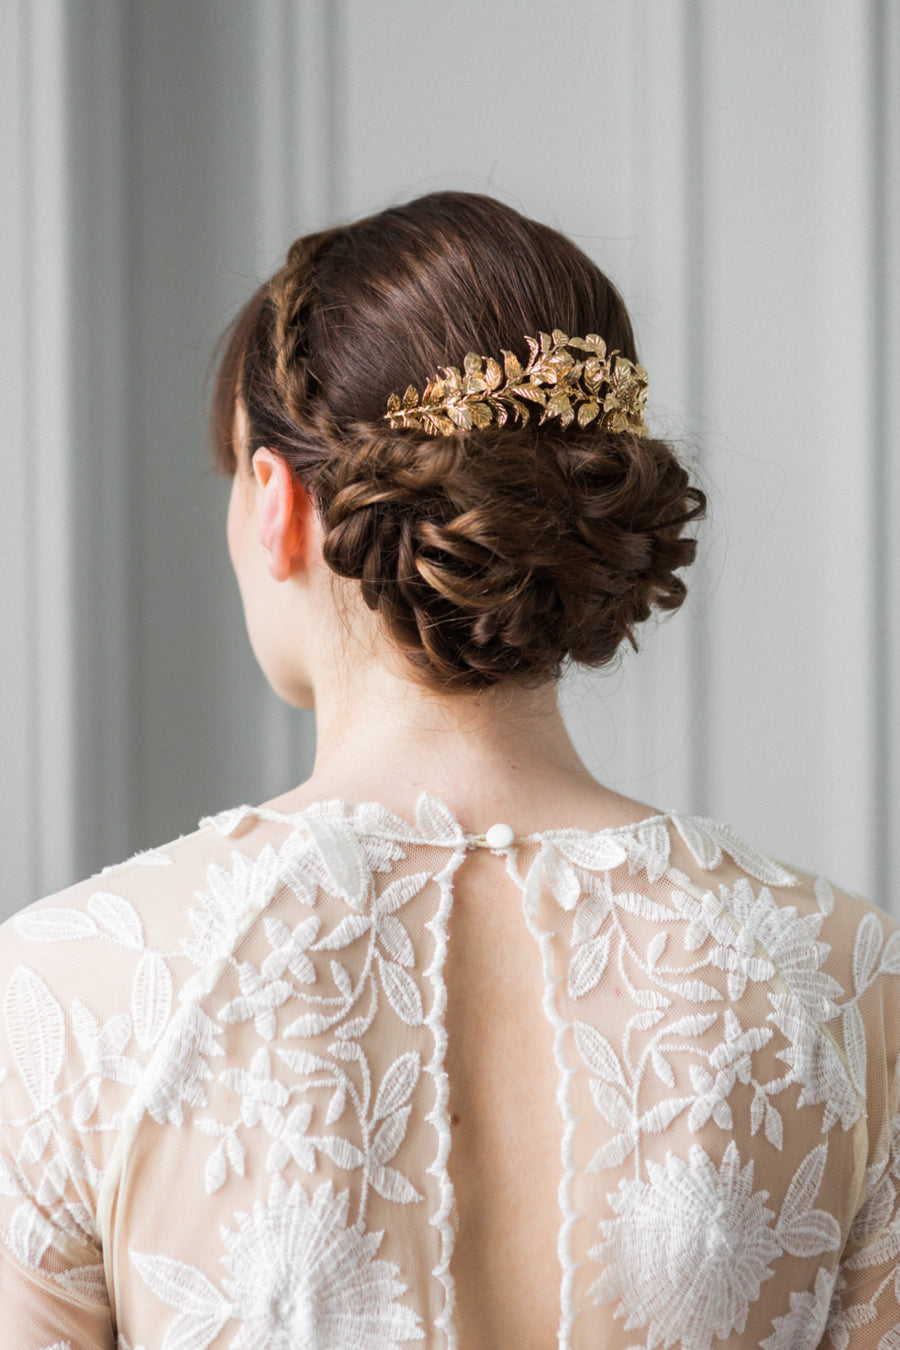 Model wearing a bridal hair comb made of gold leaves